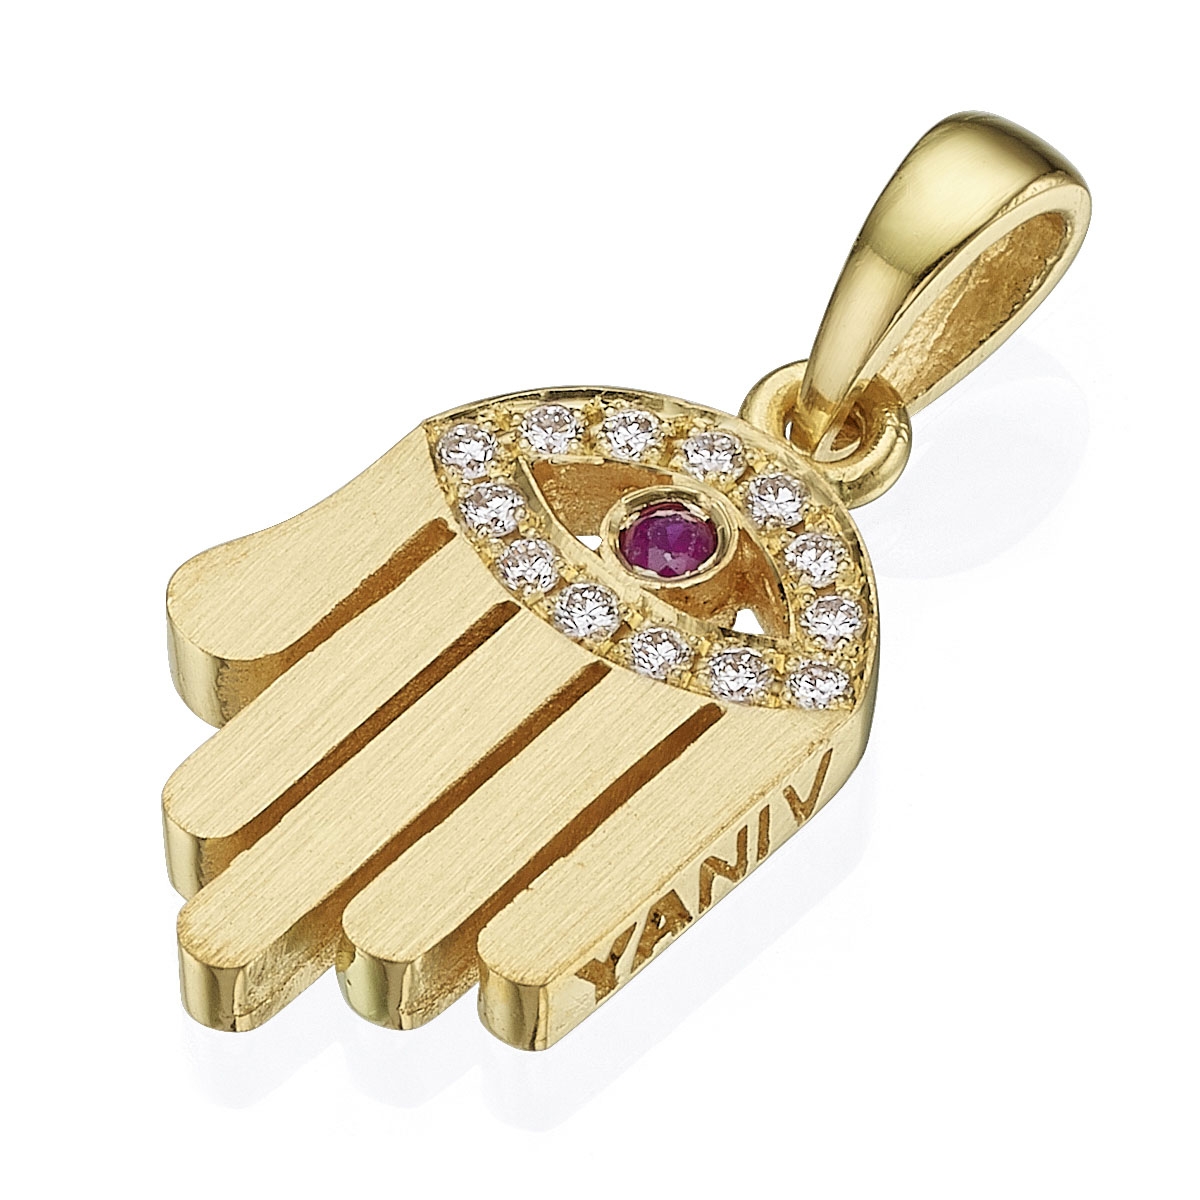 Yaniv Fine Jewelry 18K Gold Hamsa and Evil Eye Pendant With Diamonds And Ruby (Choice of Colors) - 1